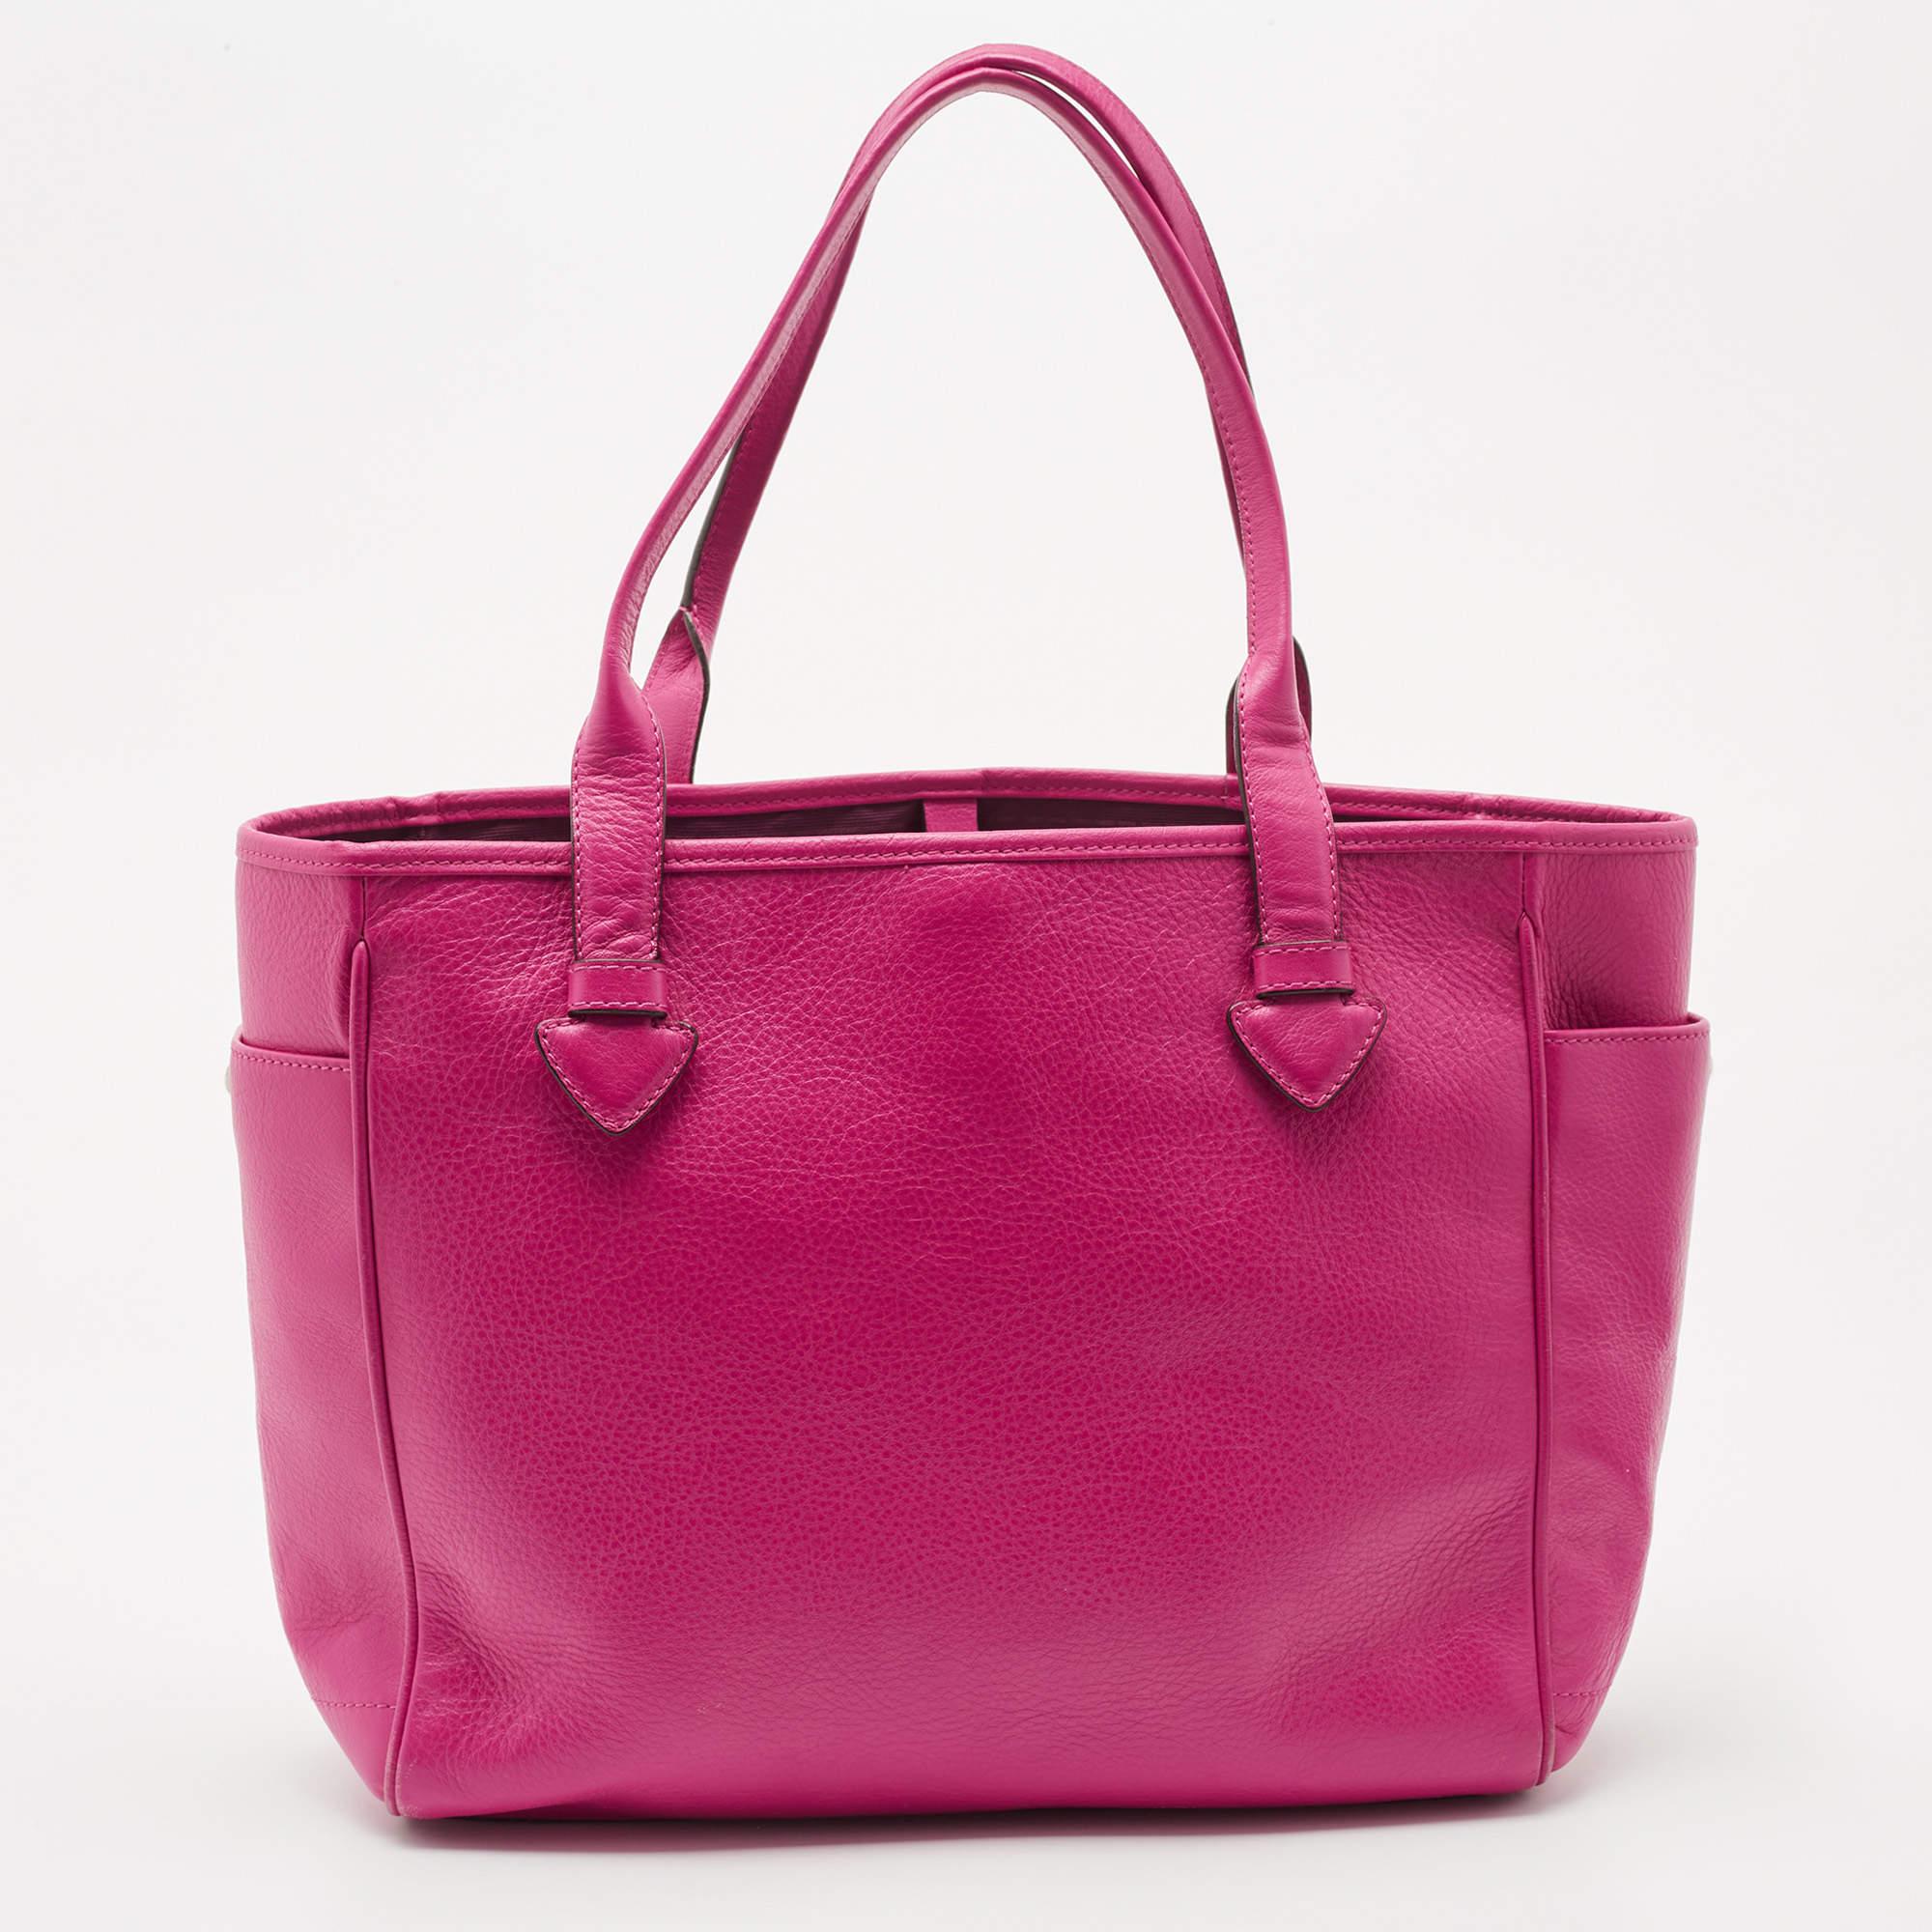 Meant for you to carry all your essentials with ease is this tote by Loewe. Crafted from leather, it comes in a stunning shade of pink. The bag has dual handles, two exterior side pockets, a brand logo, a nylon-lined interior with a zip pocket and